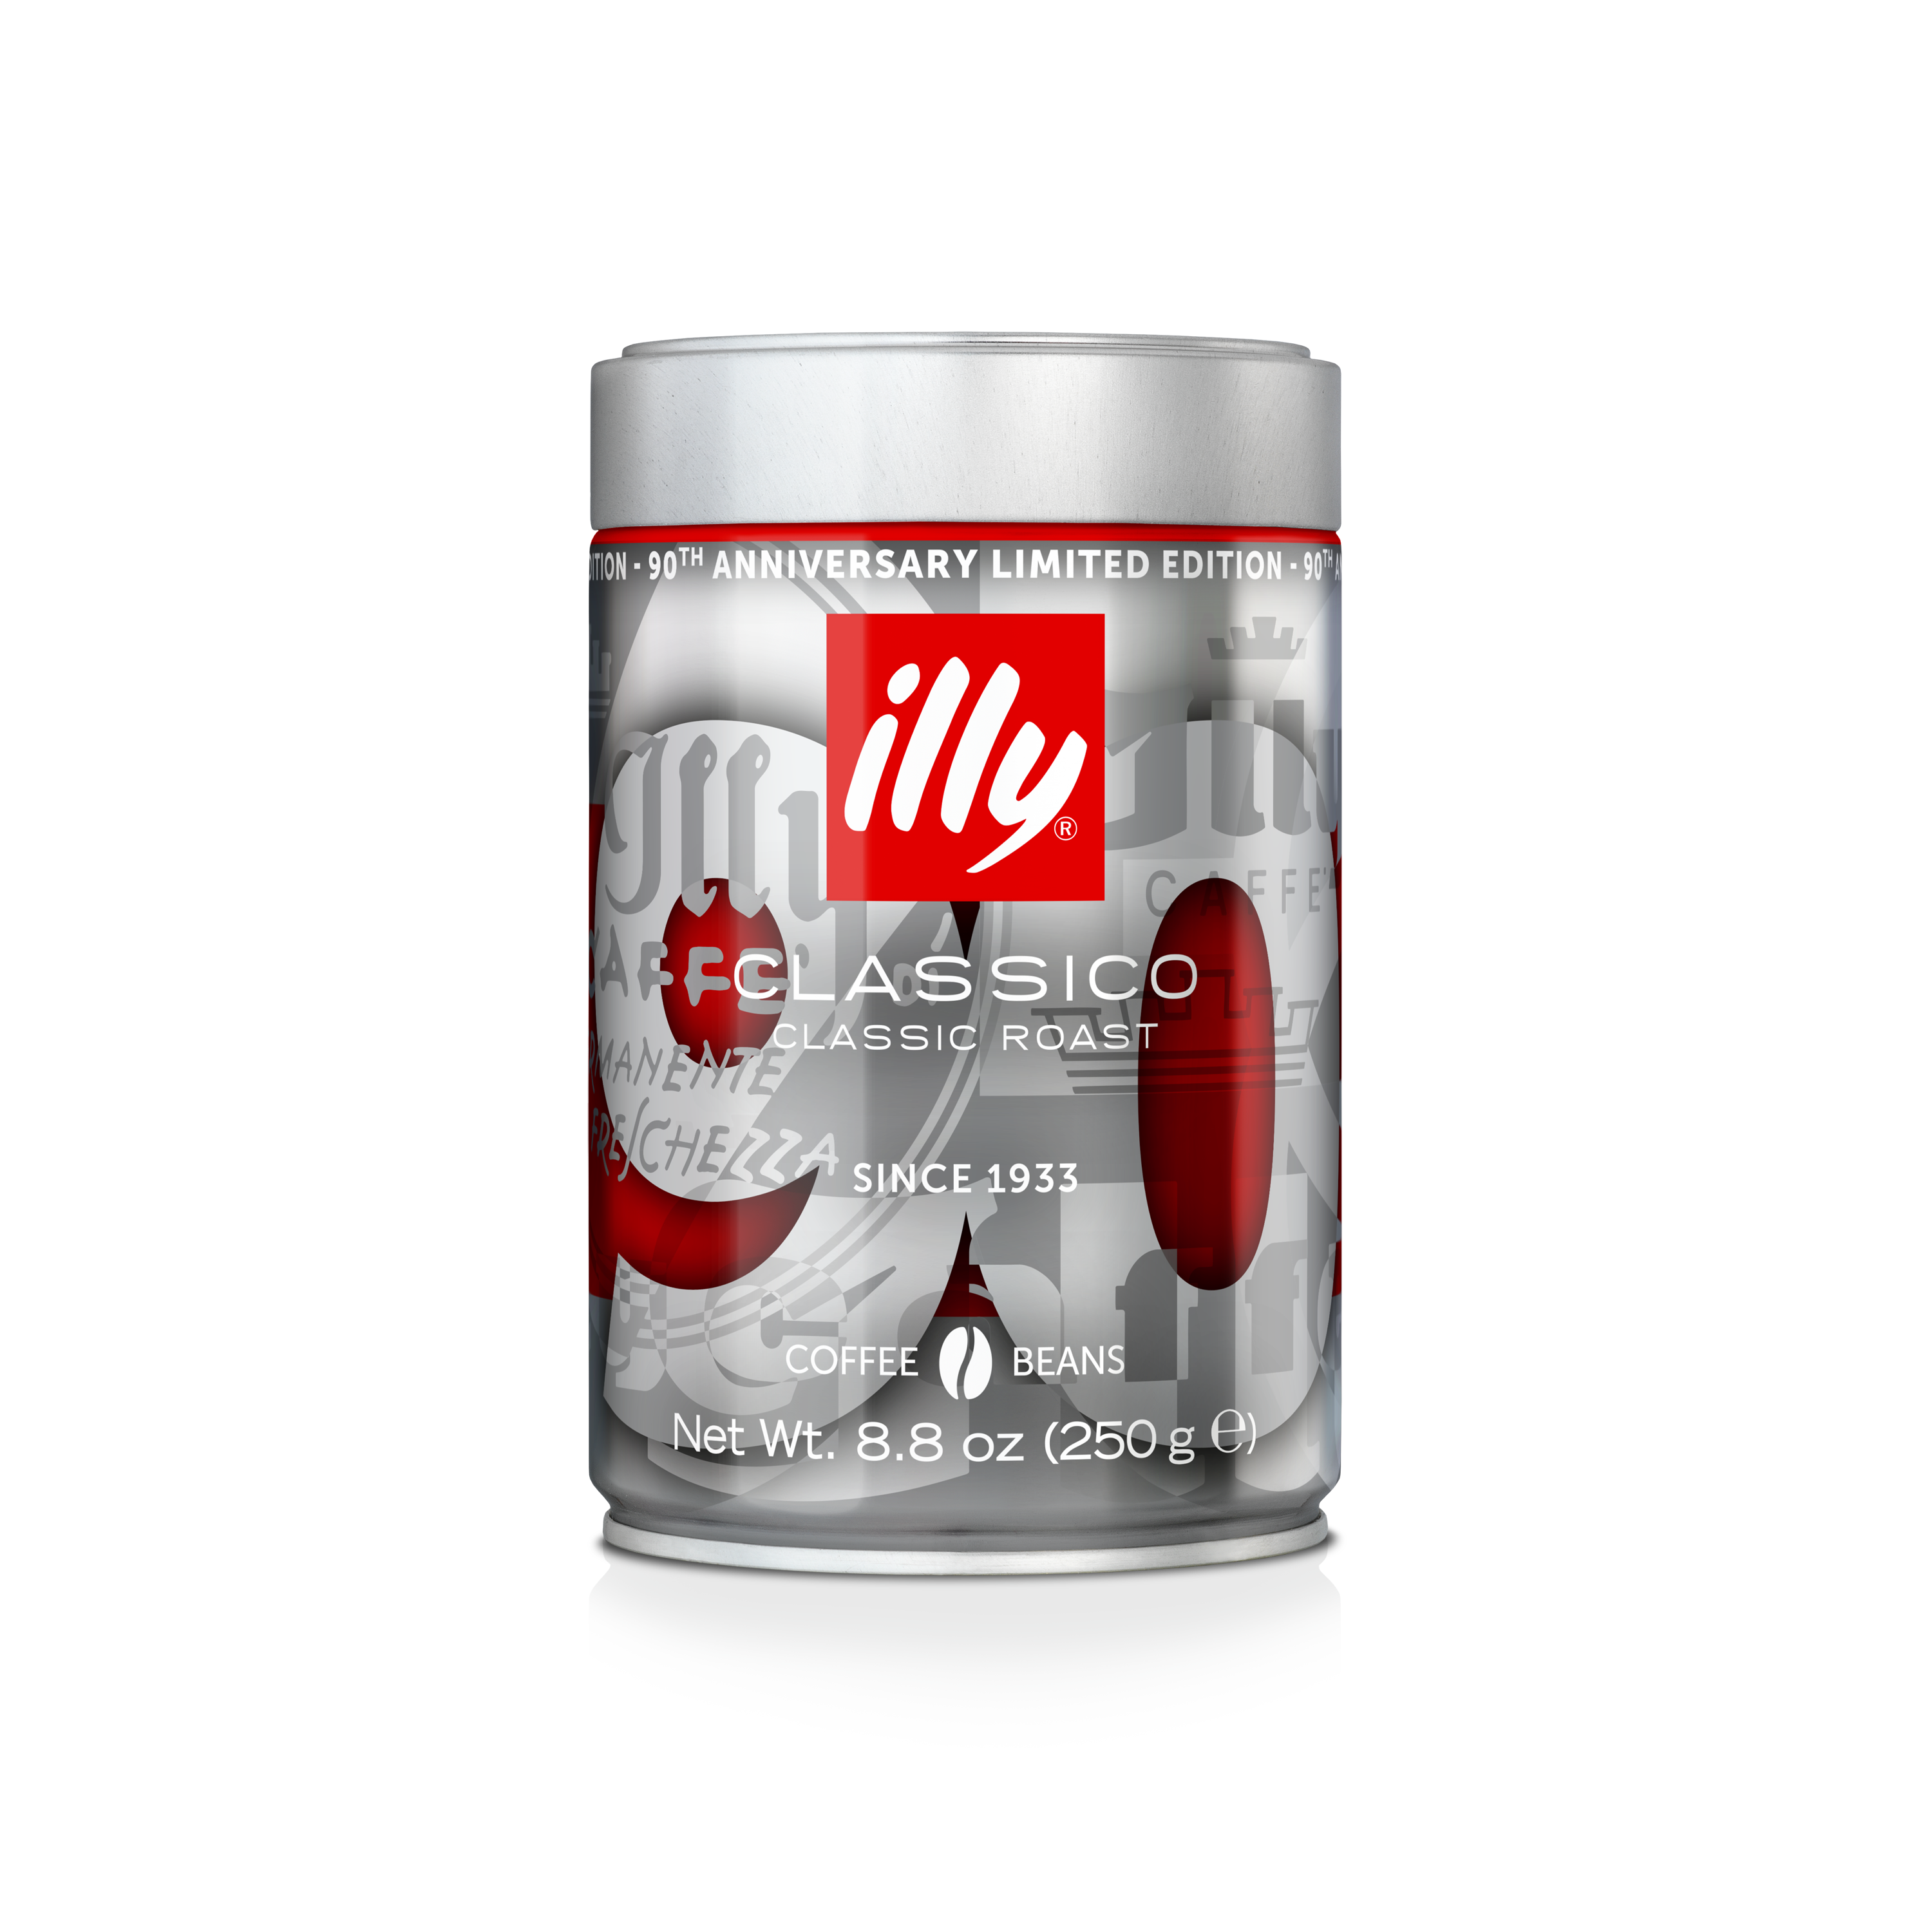 90th birthday illy limited edition - 250g classico beans